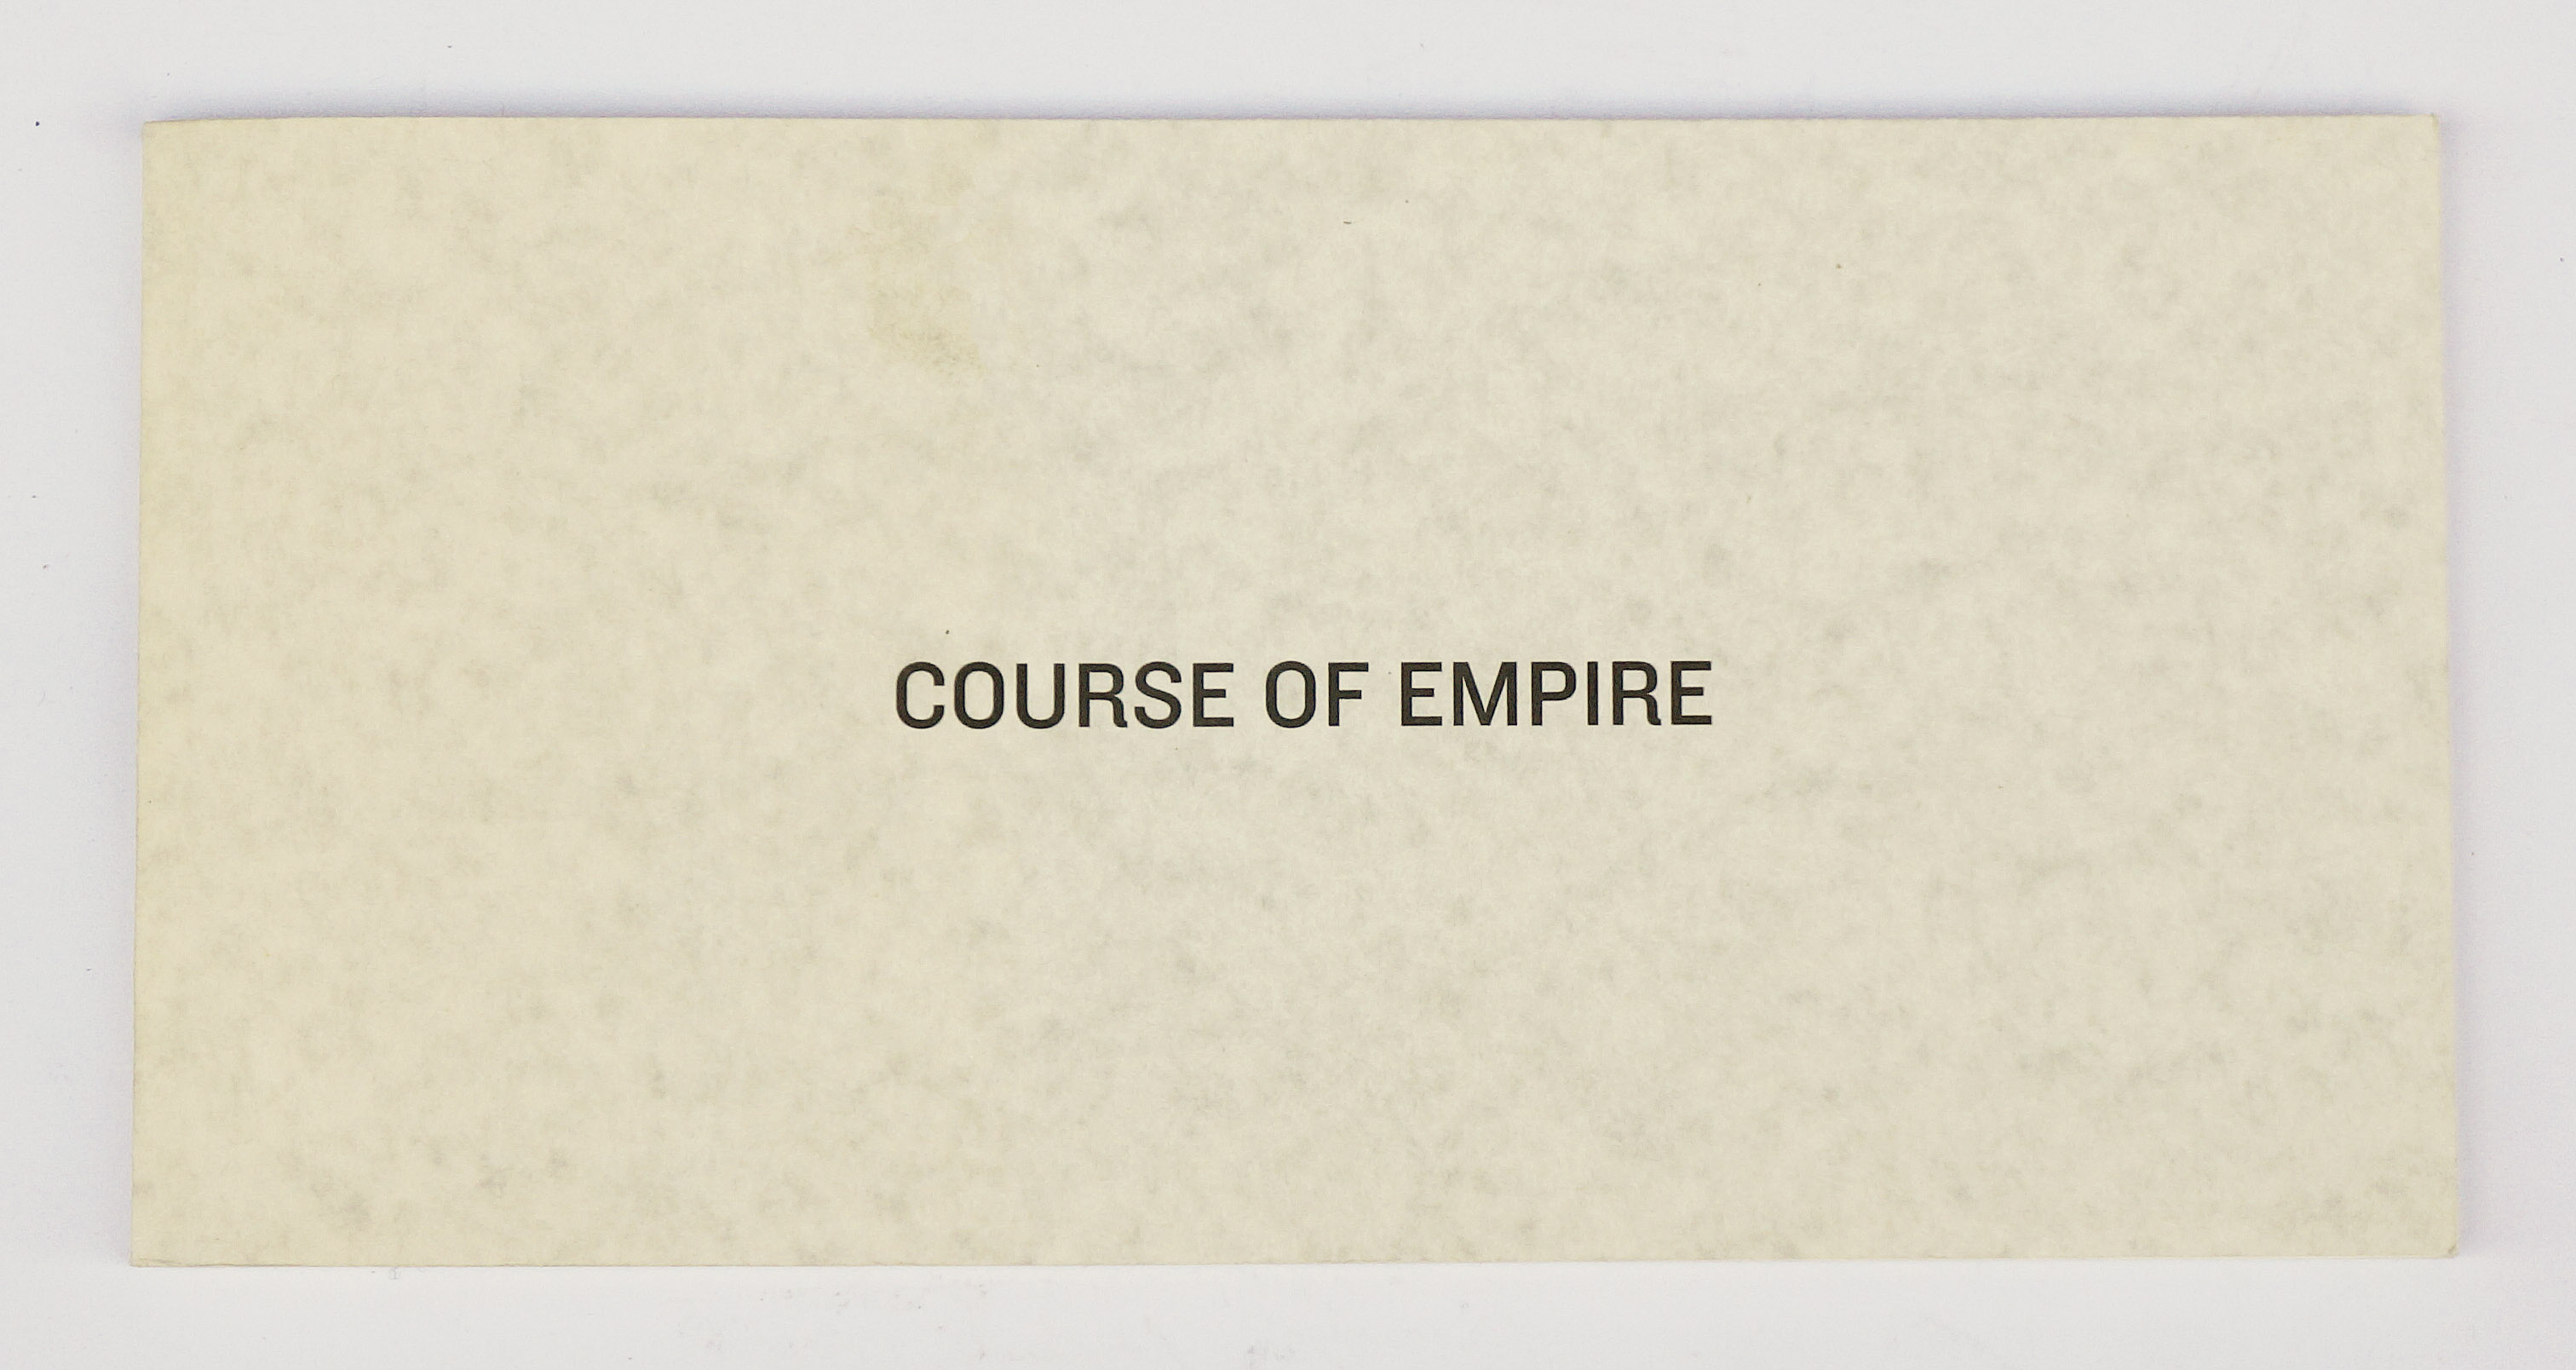 Course of empire. Paintings by Ed Ruscha.